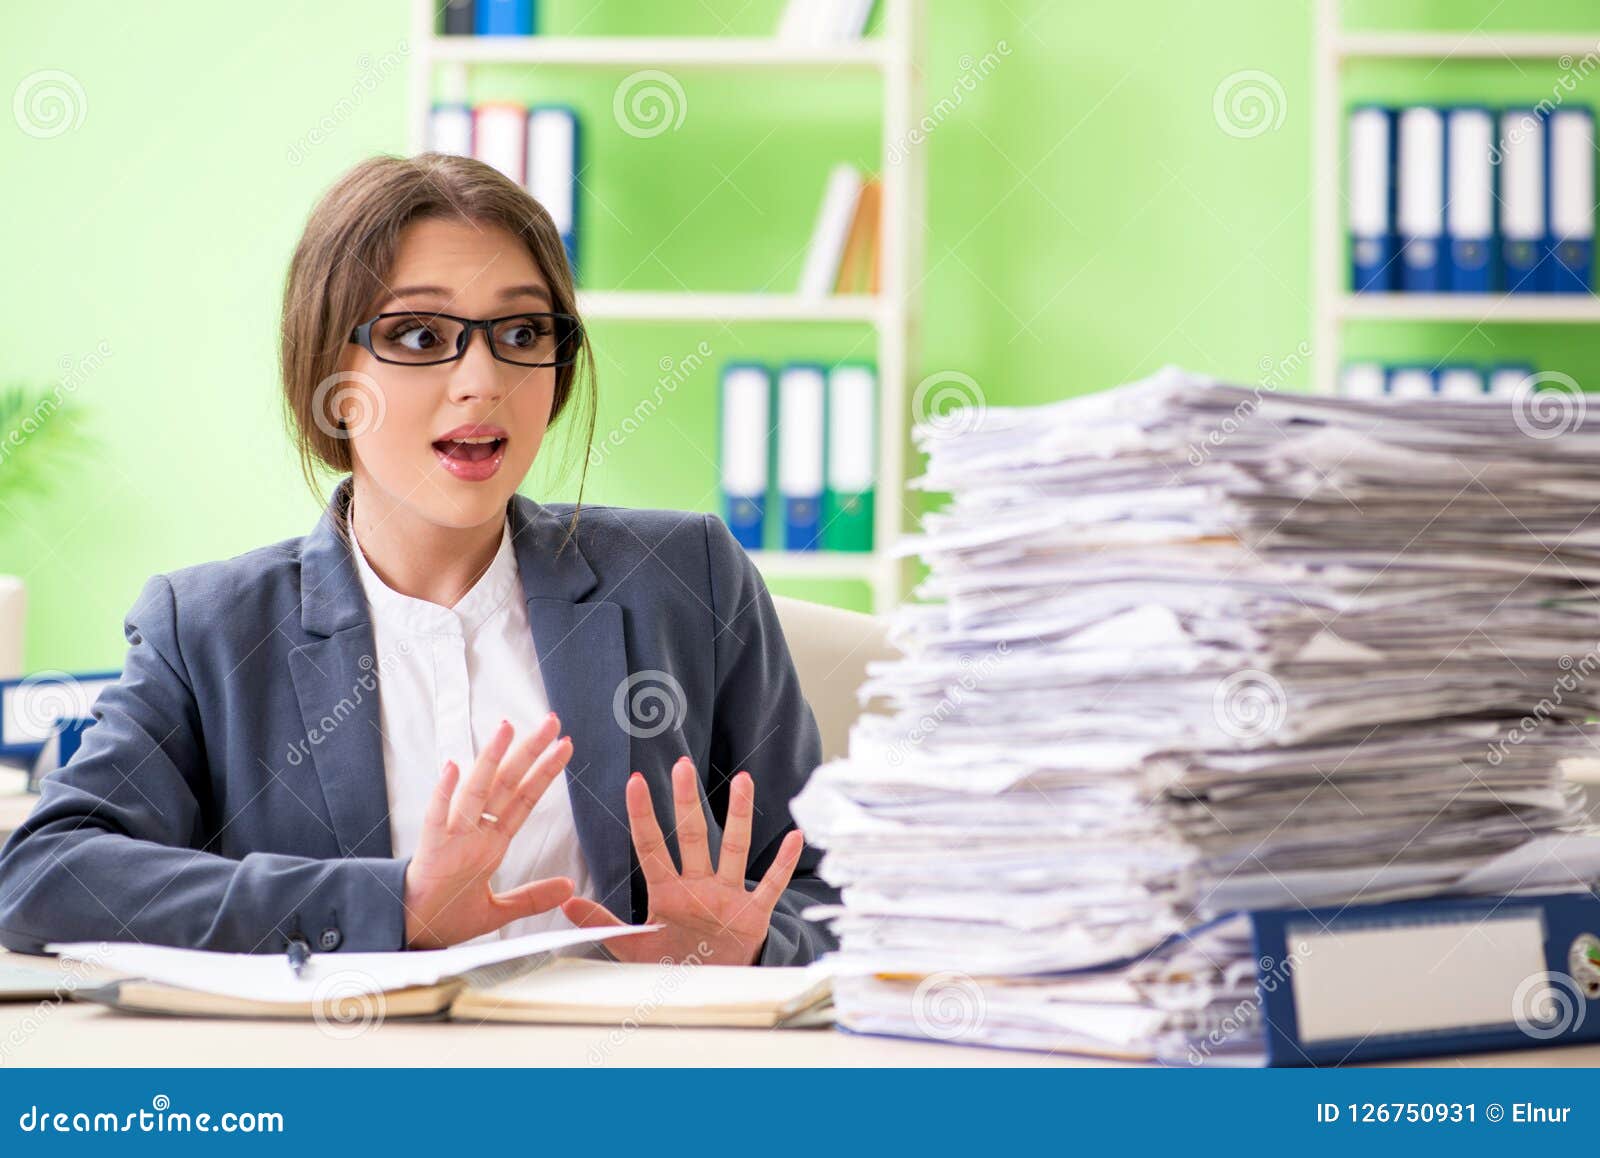 the young female employee very busy with ongoing paperwork